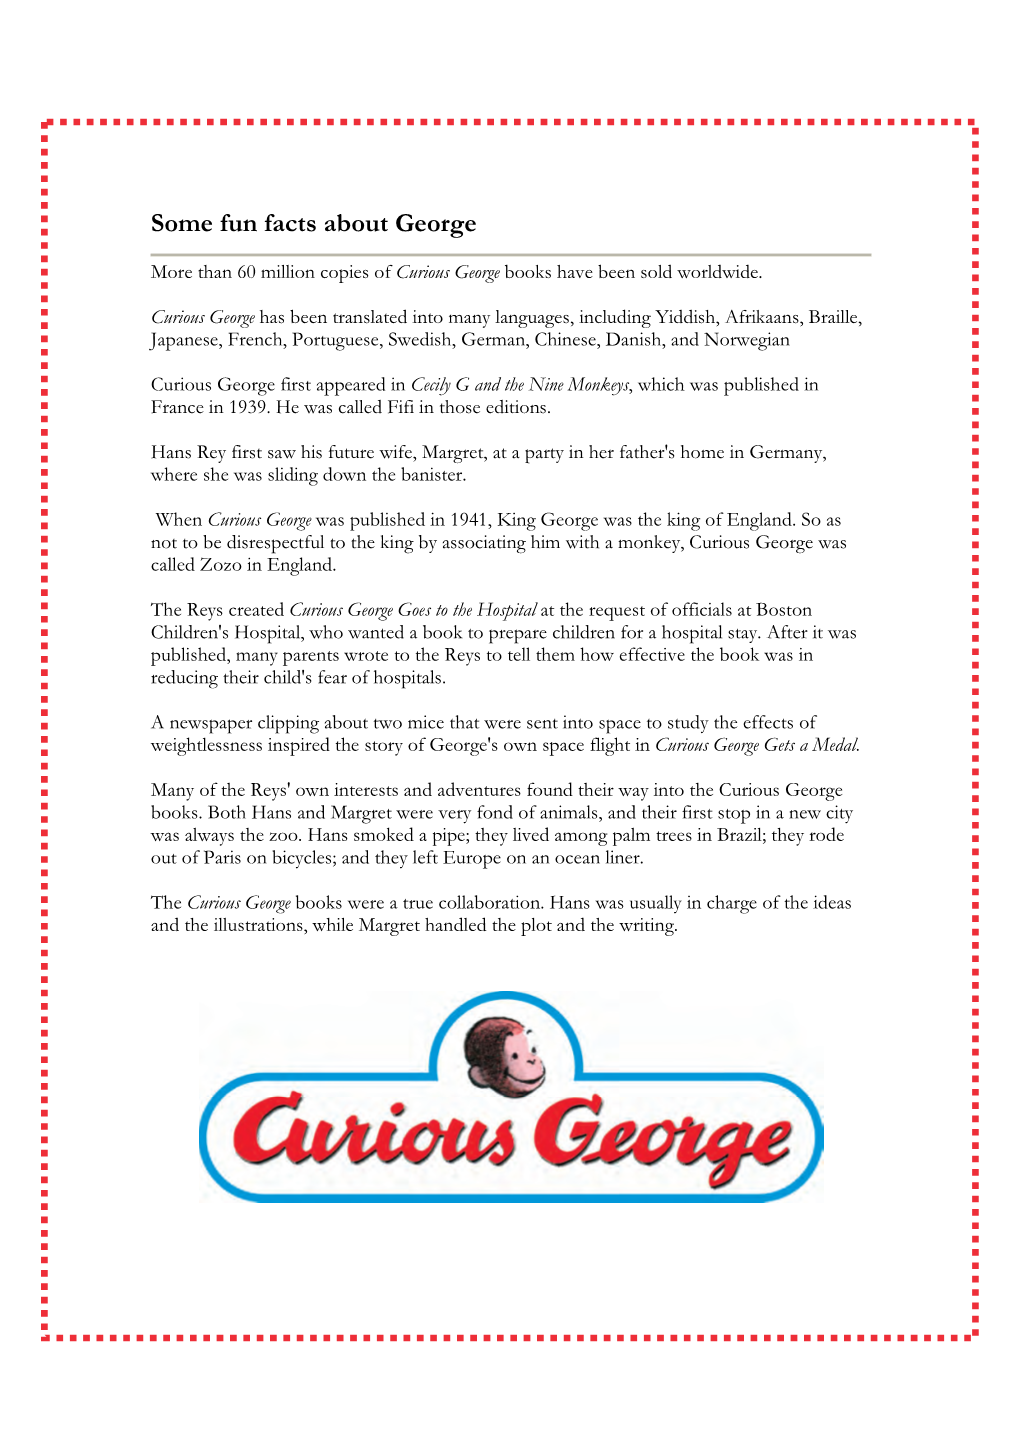 Some Fun Facts About George